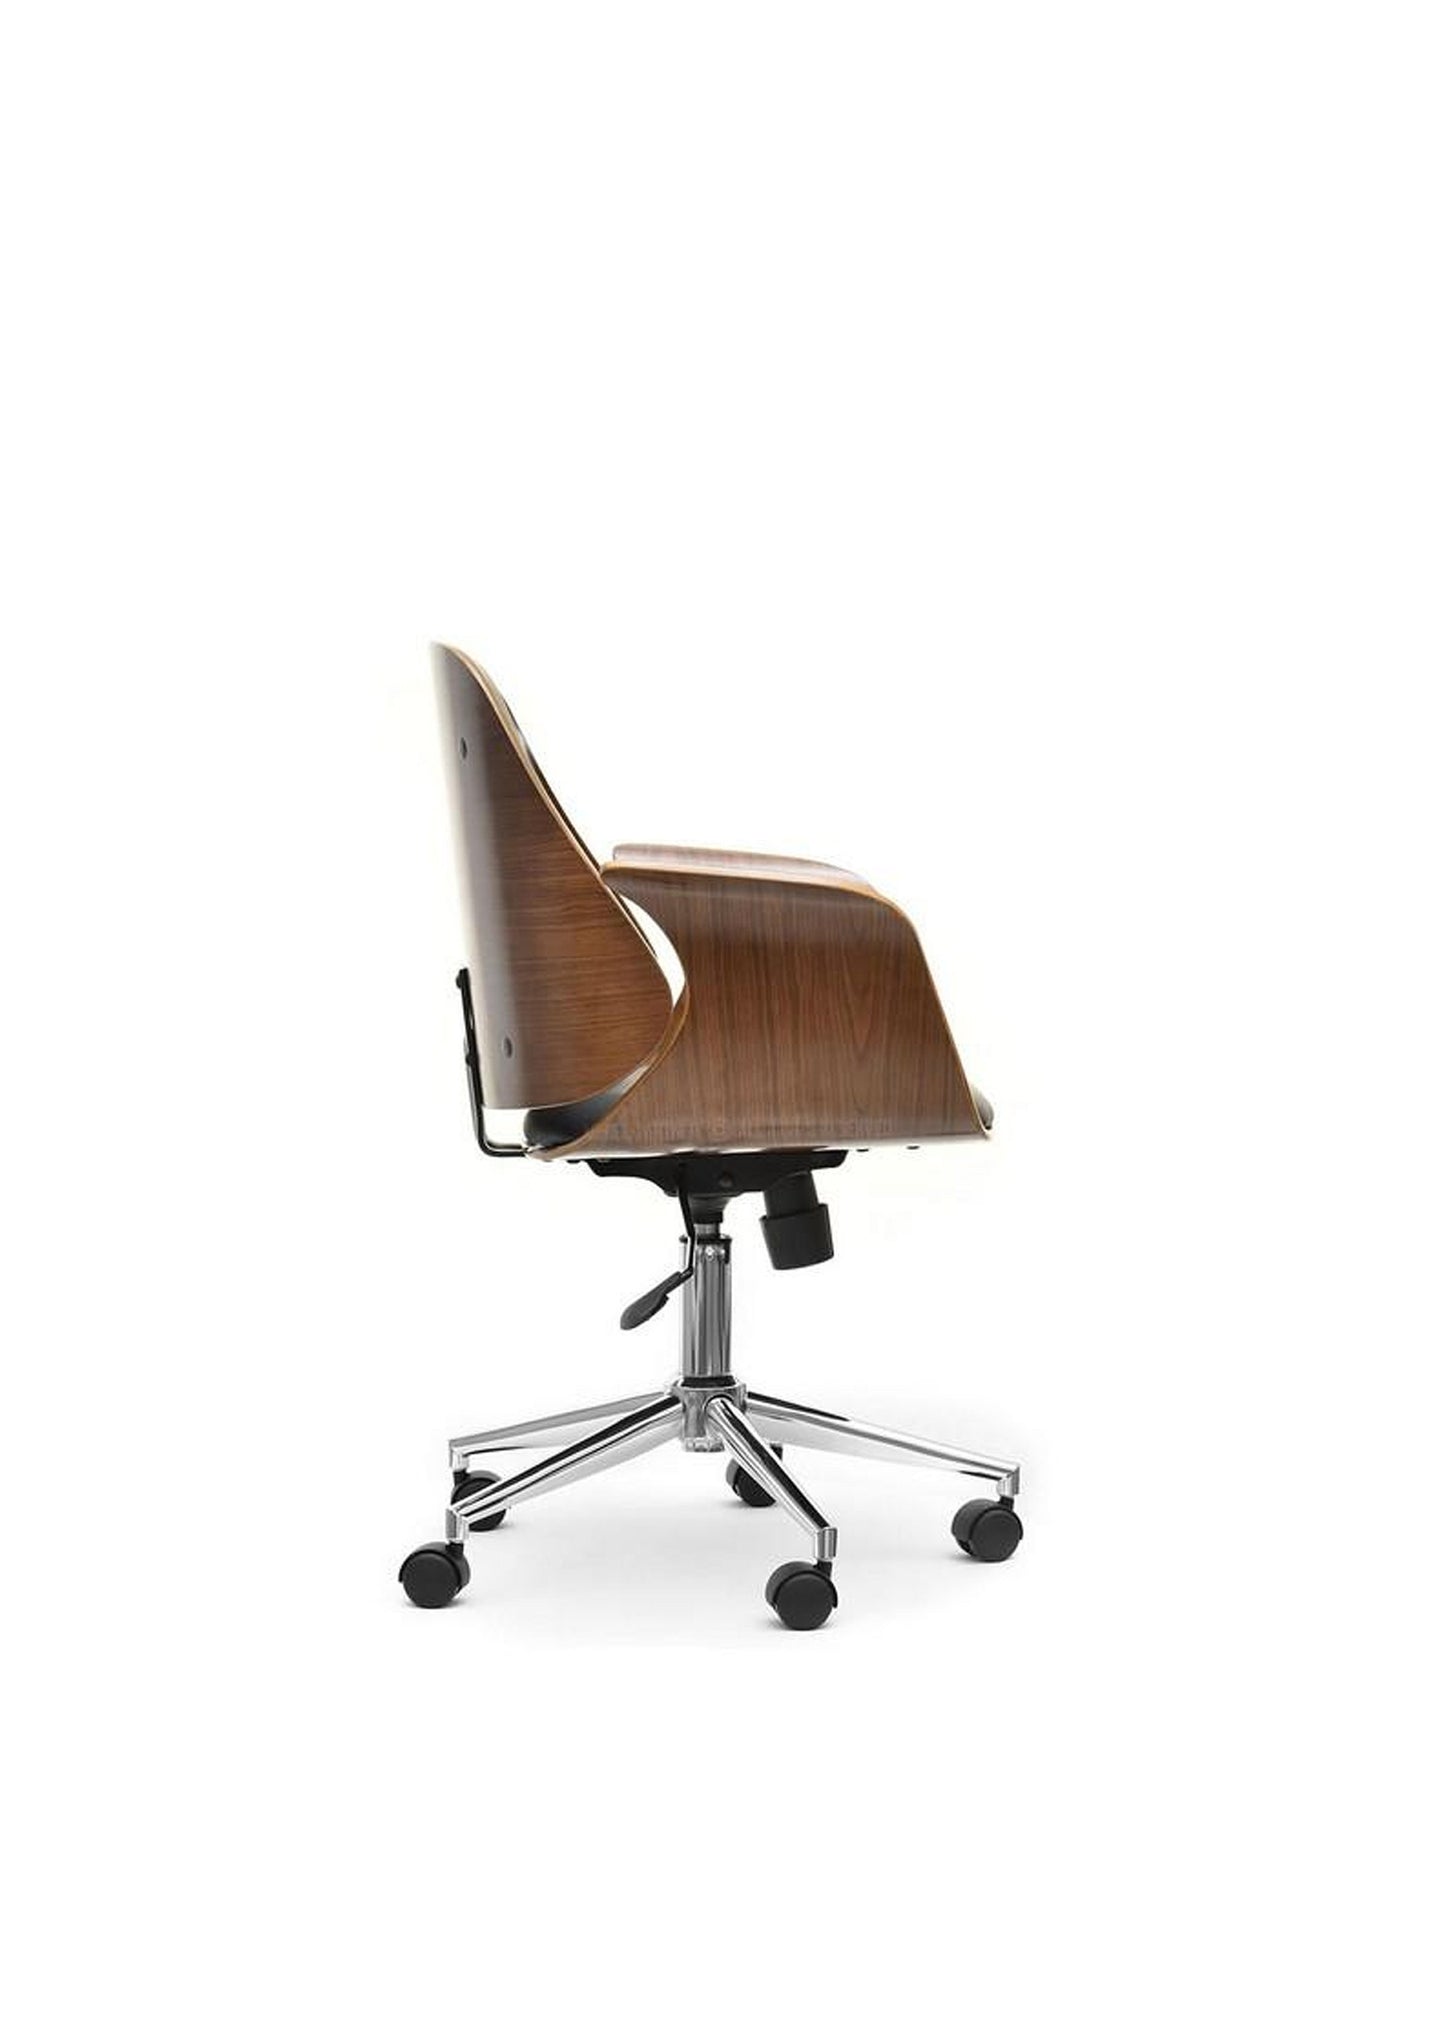 Vintage Retro Style Designer office desk executive chair in black faux leather and walnut or Grey